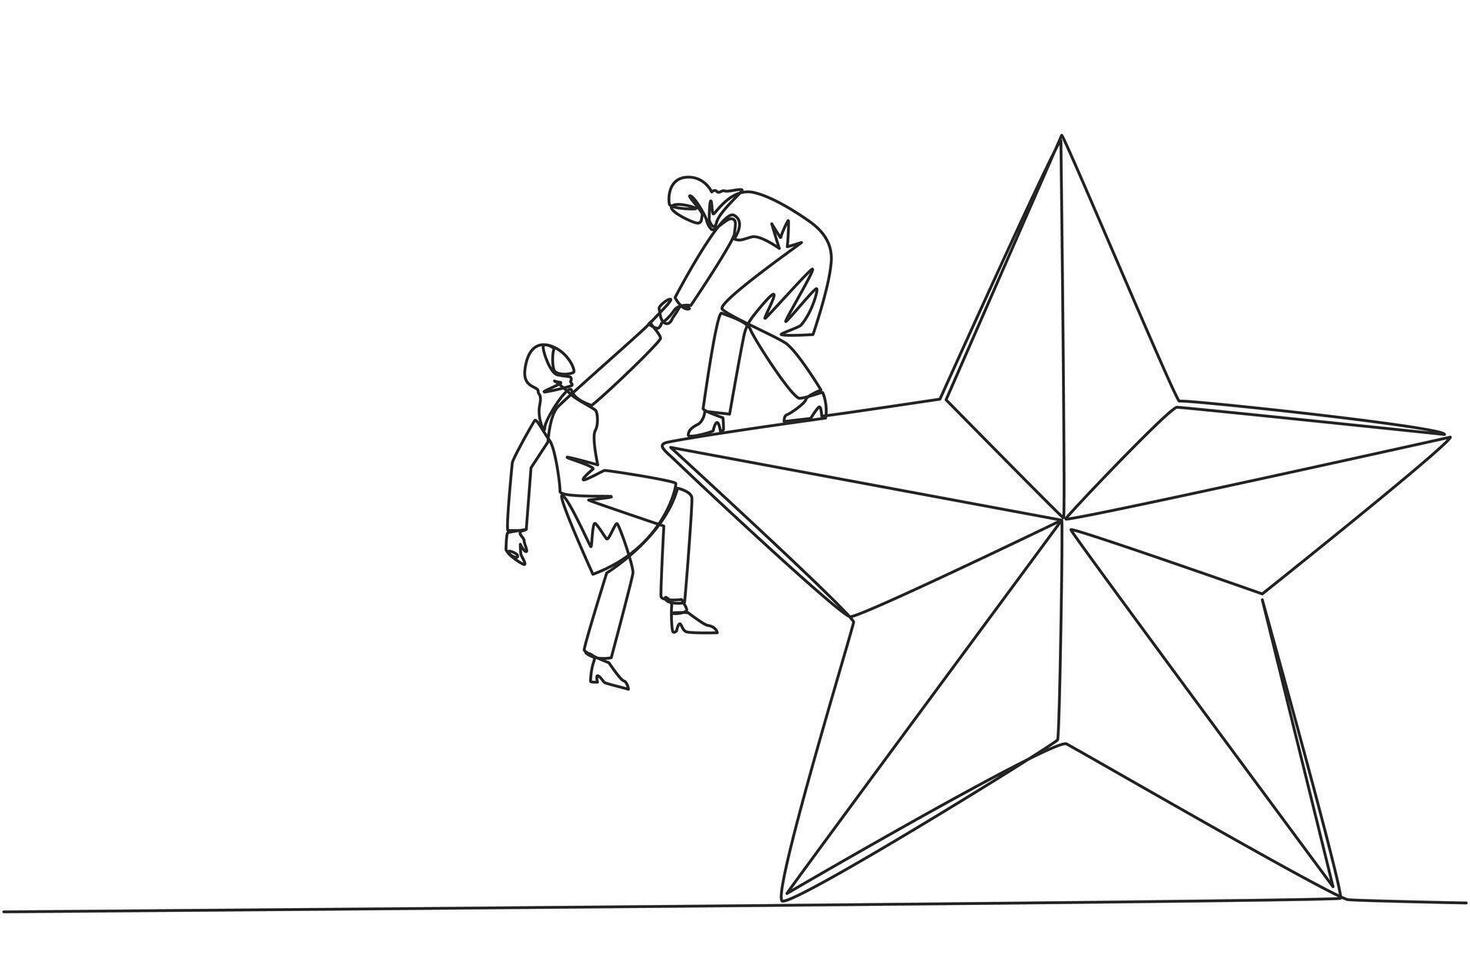 Single one line drawing Arab businesswoman helps colleague climb star. Metaphor of achieving dreams of success together. Have a very good career position. Continuous line design graphic illustration vector